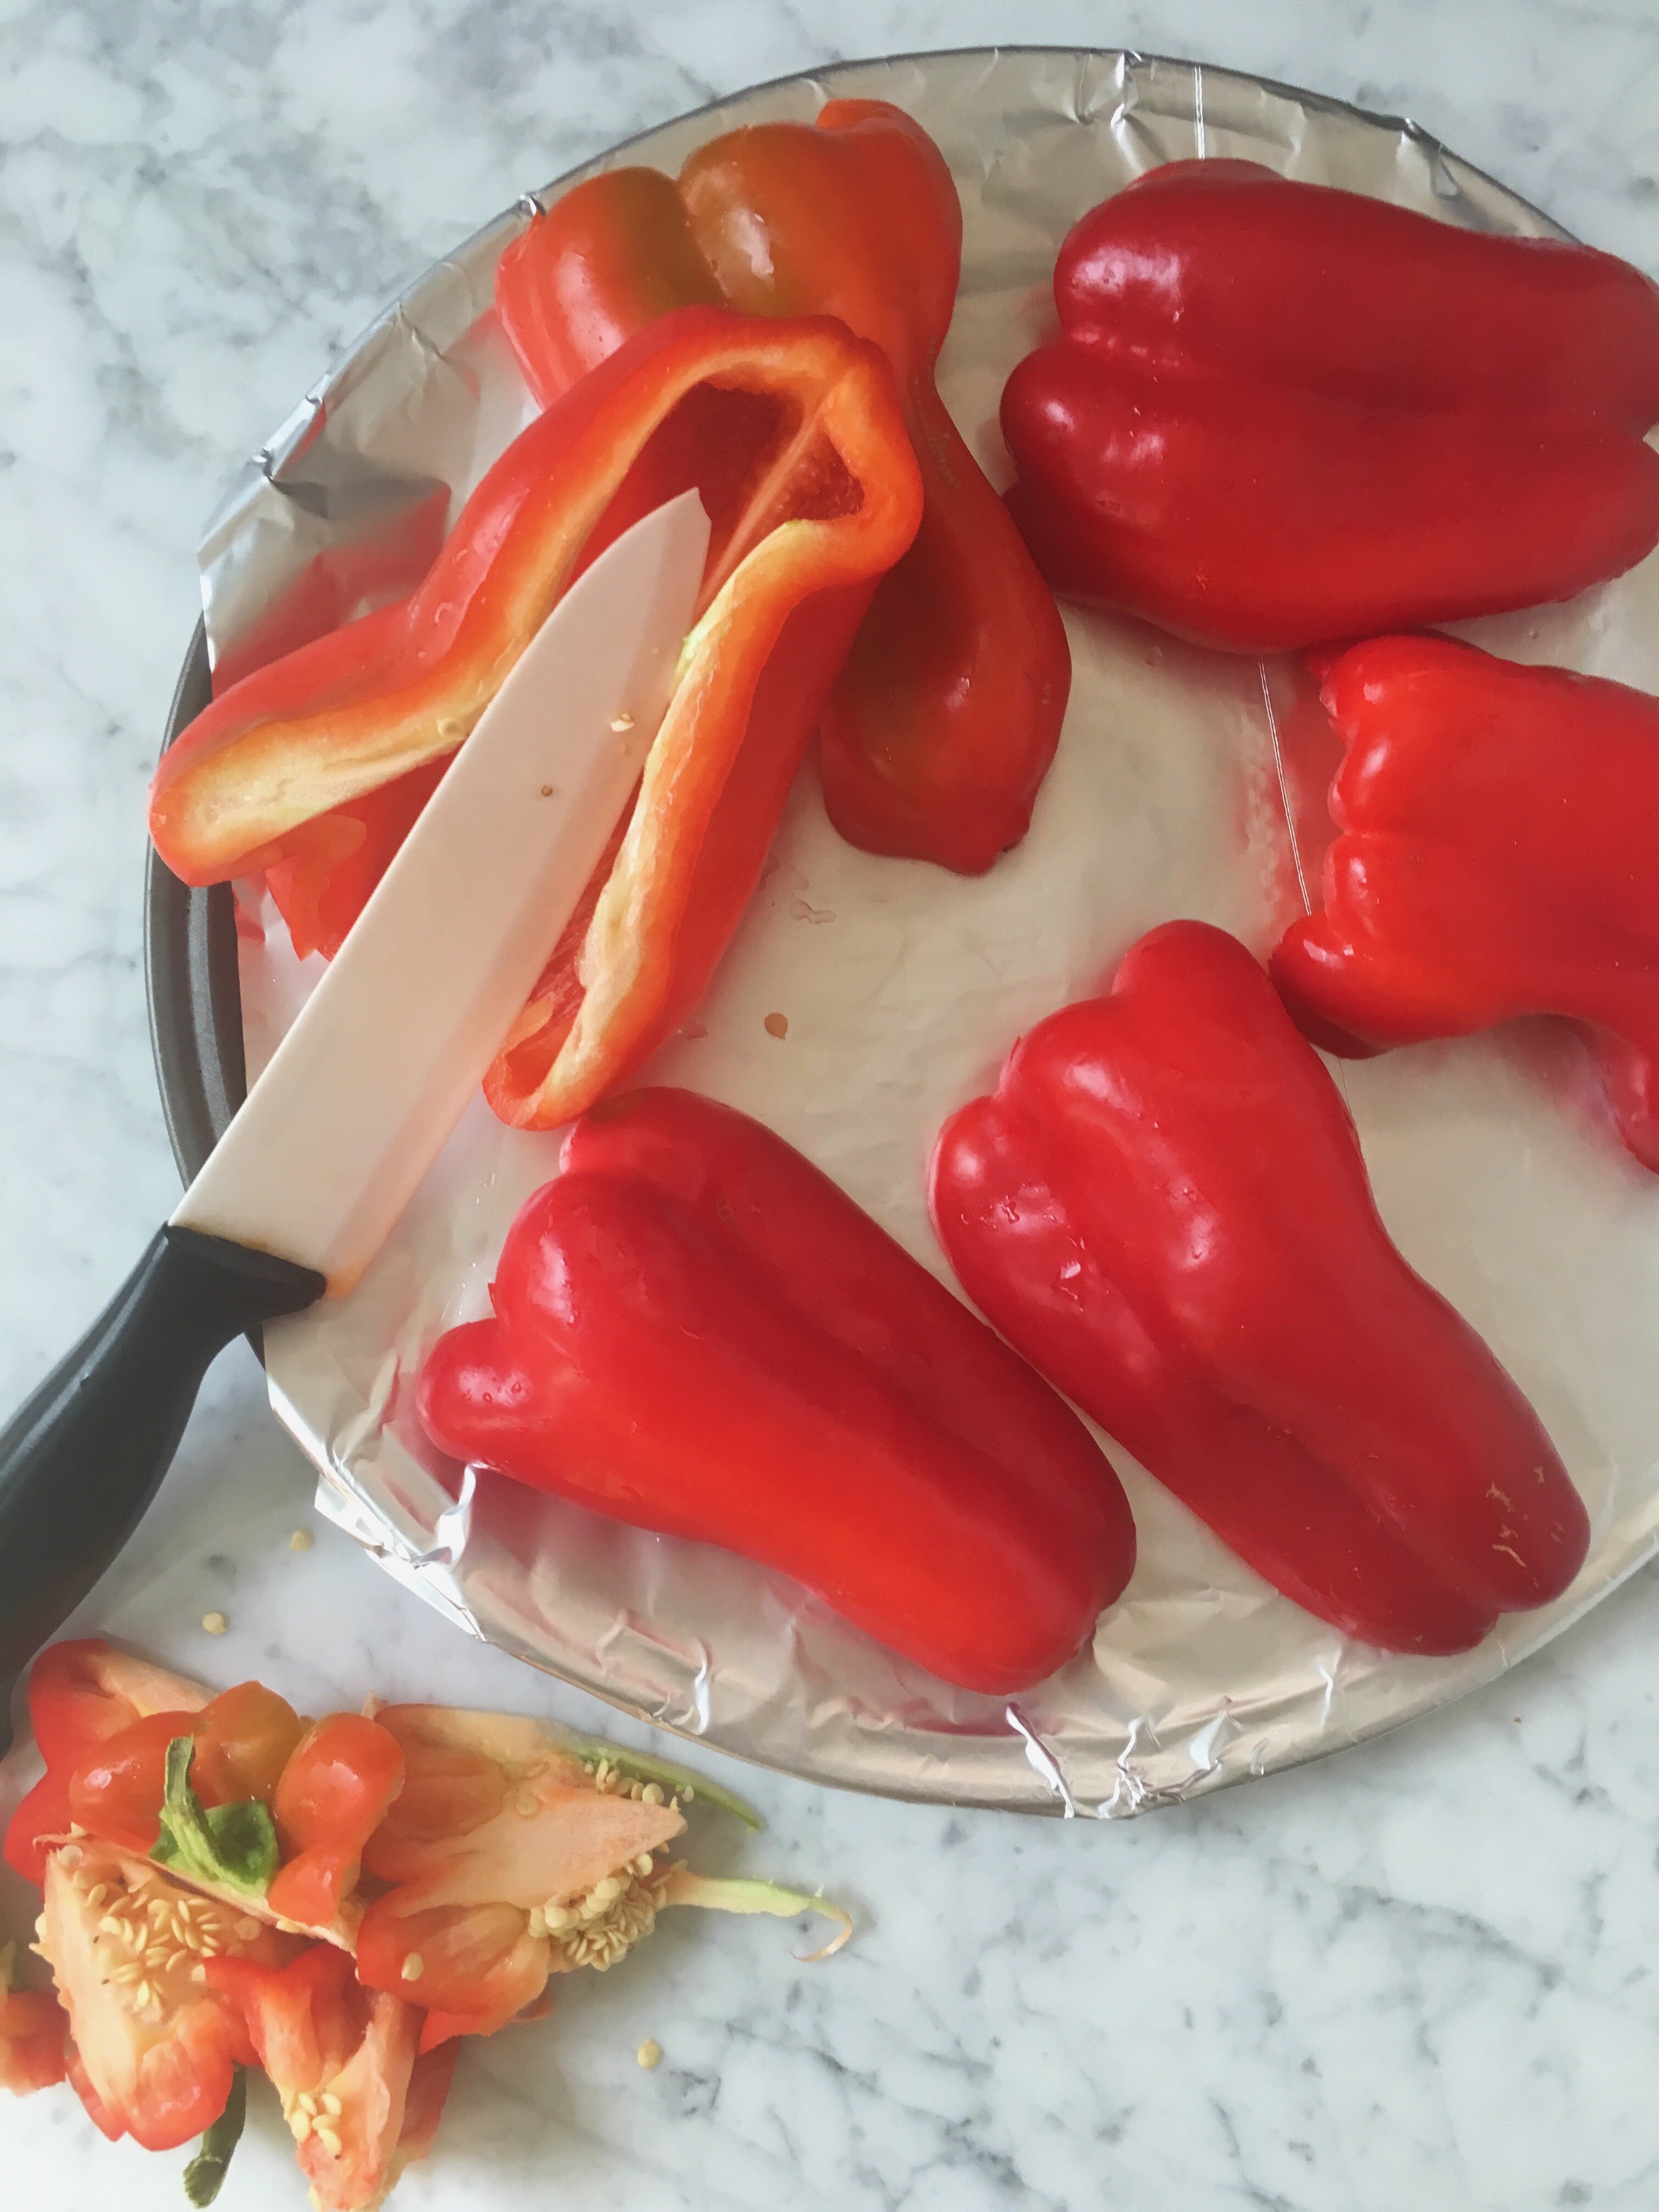 Red bell pepper cleaning process